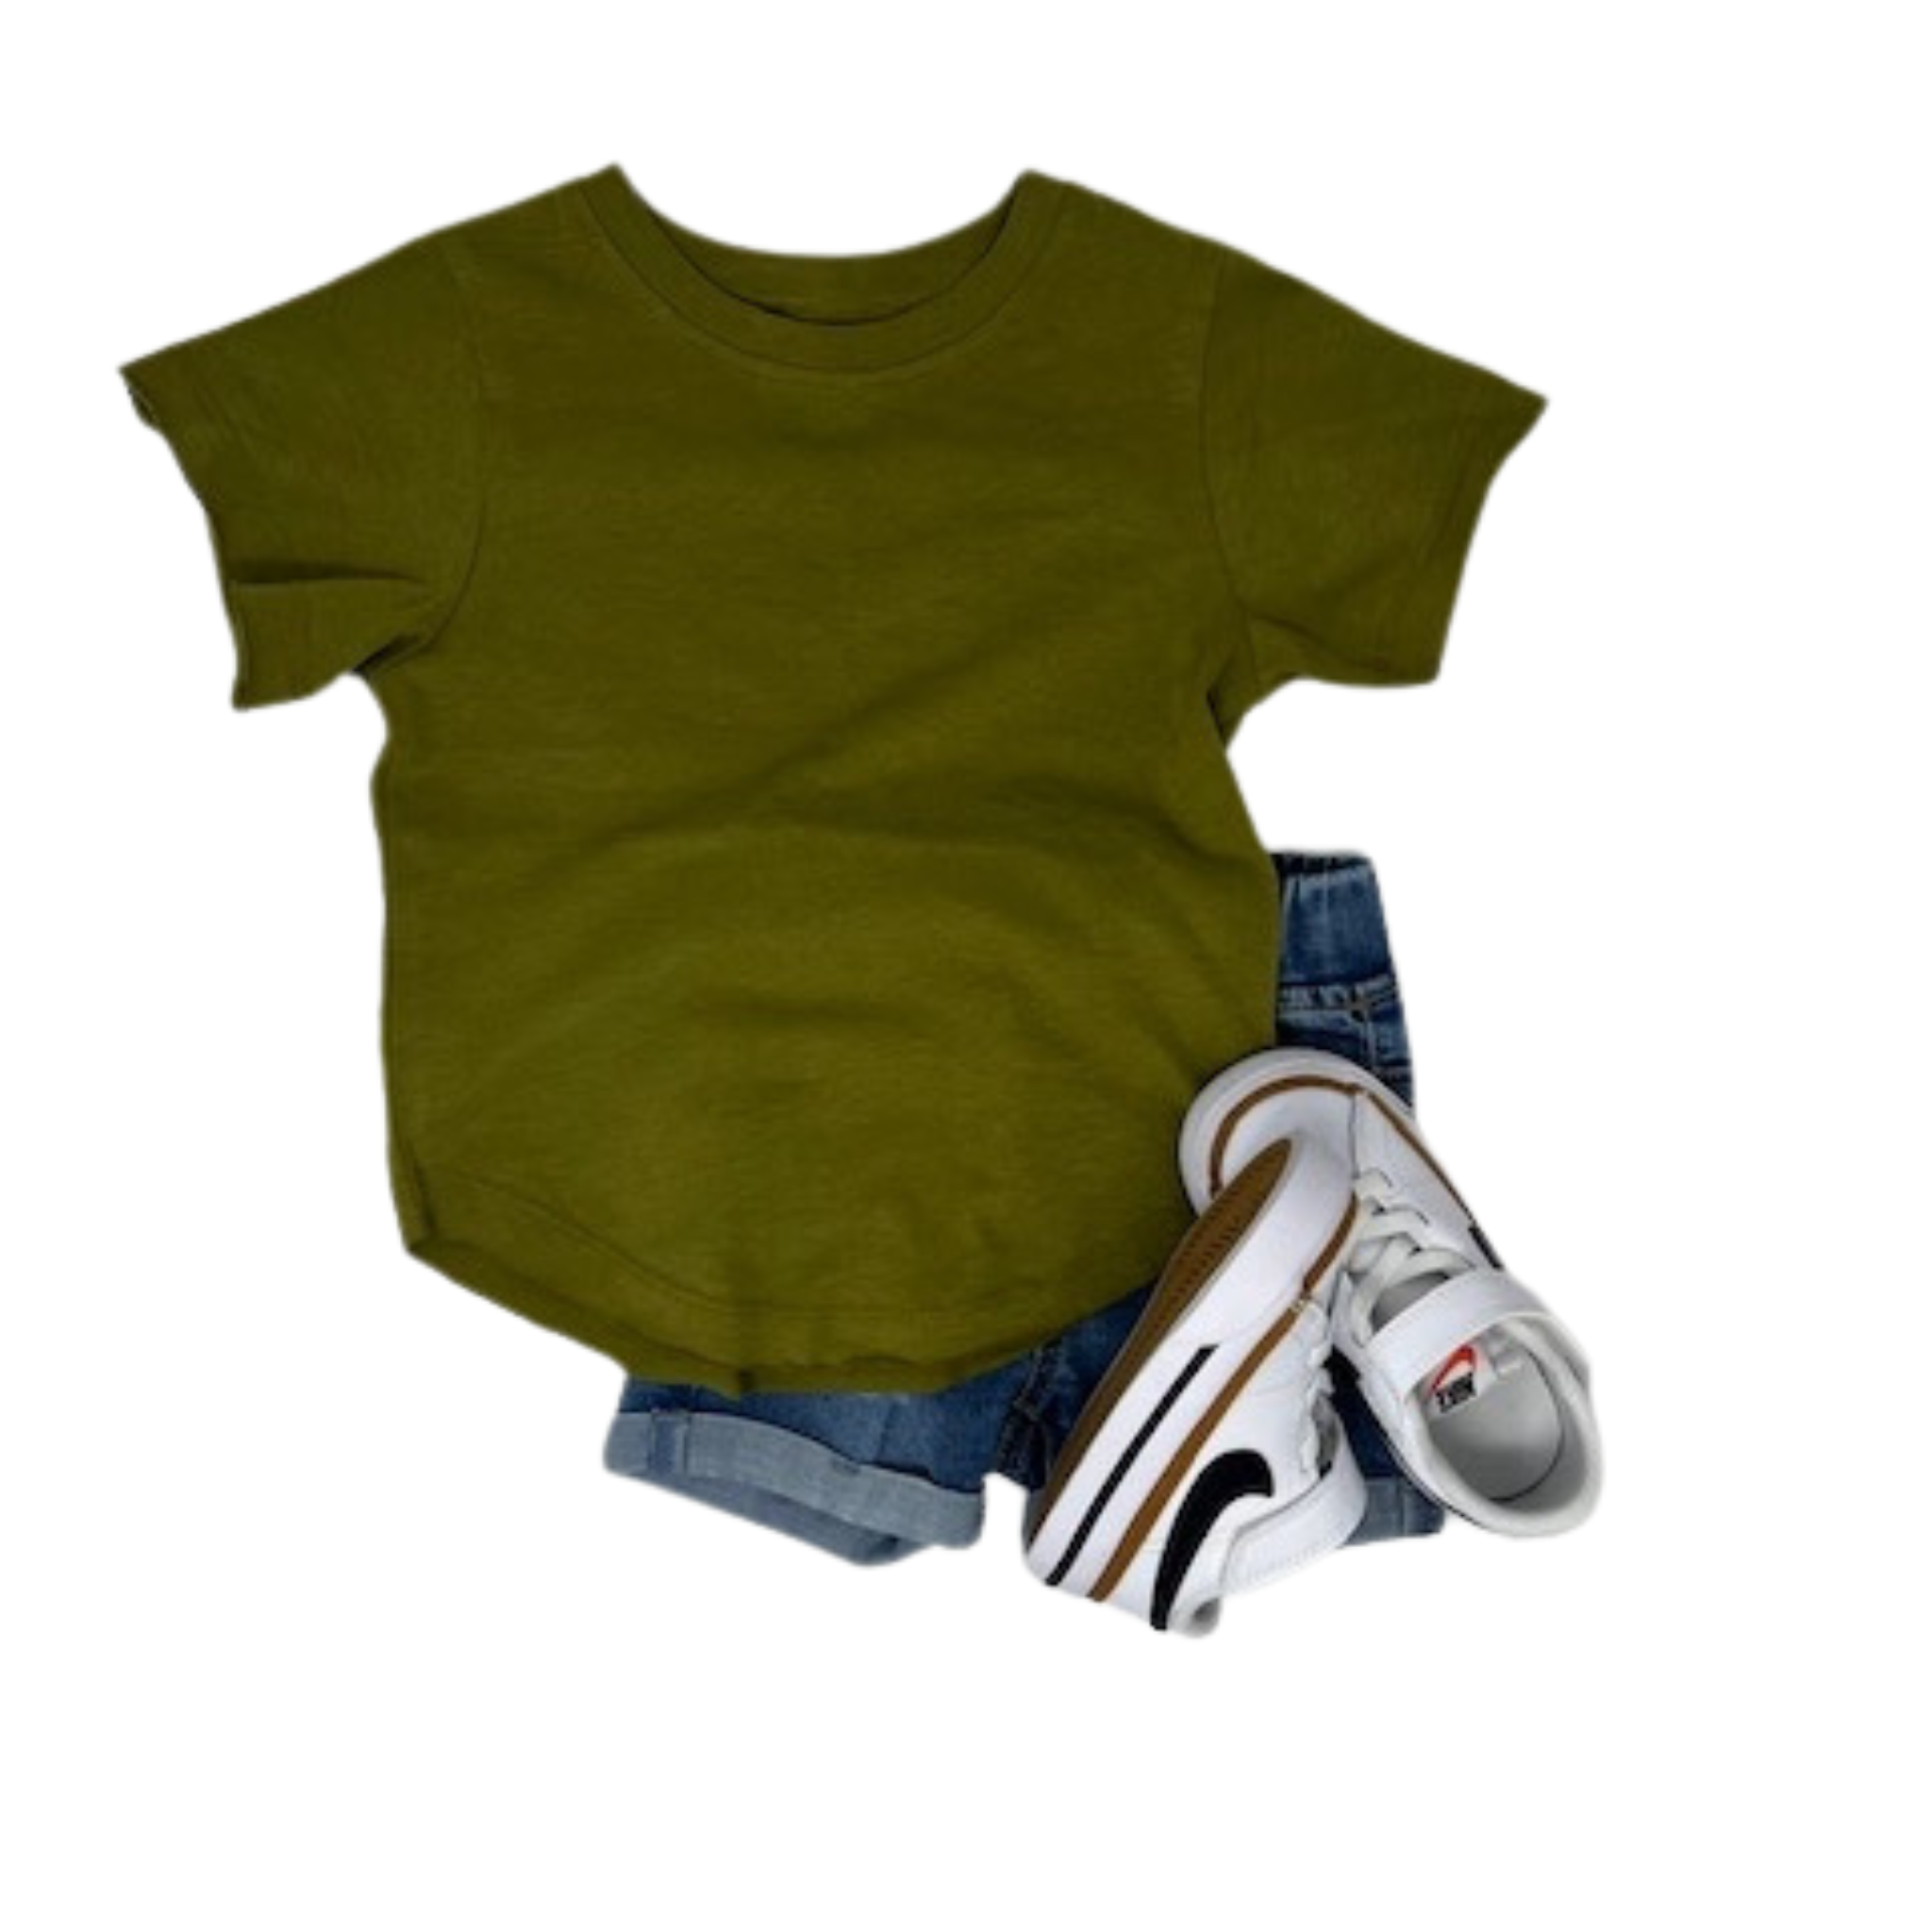 Olive Ace Cotton Blend T-Shirt styled with lennon denim shorts and sneakers